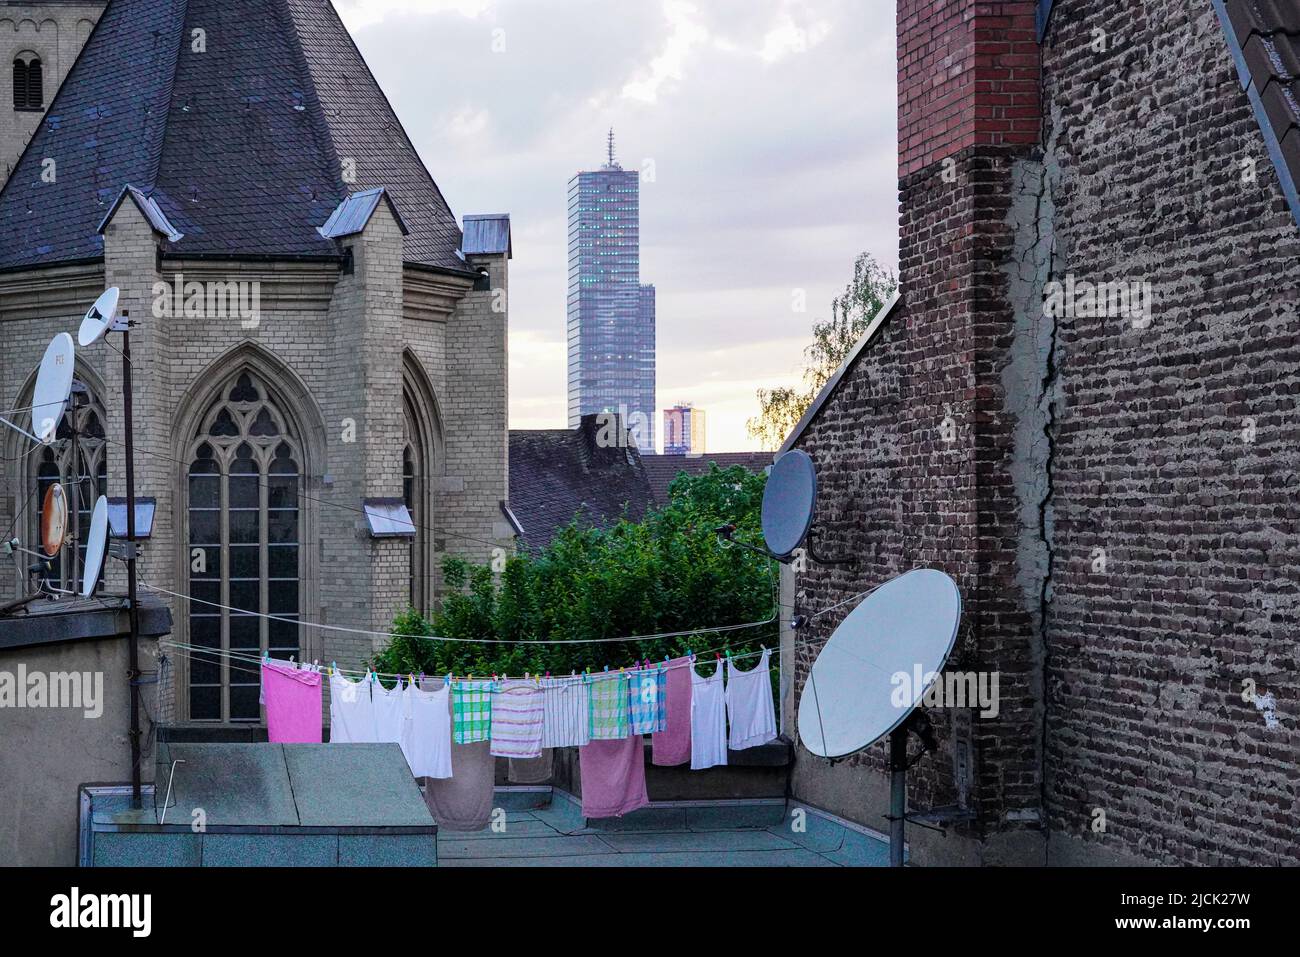 On the roof of an old building in Cologne, residents hang laundry to dry. Cologne, North Rhine-Westphalia, Germany, 21.5.22 Stock Photo